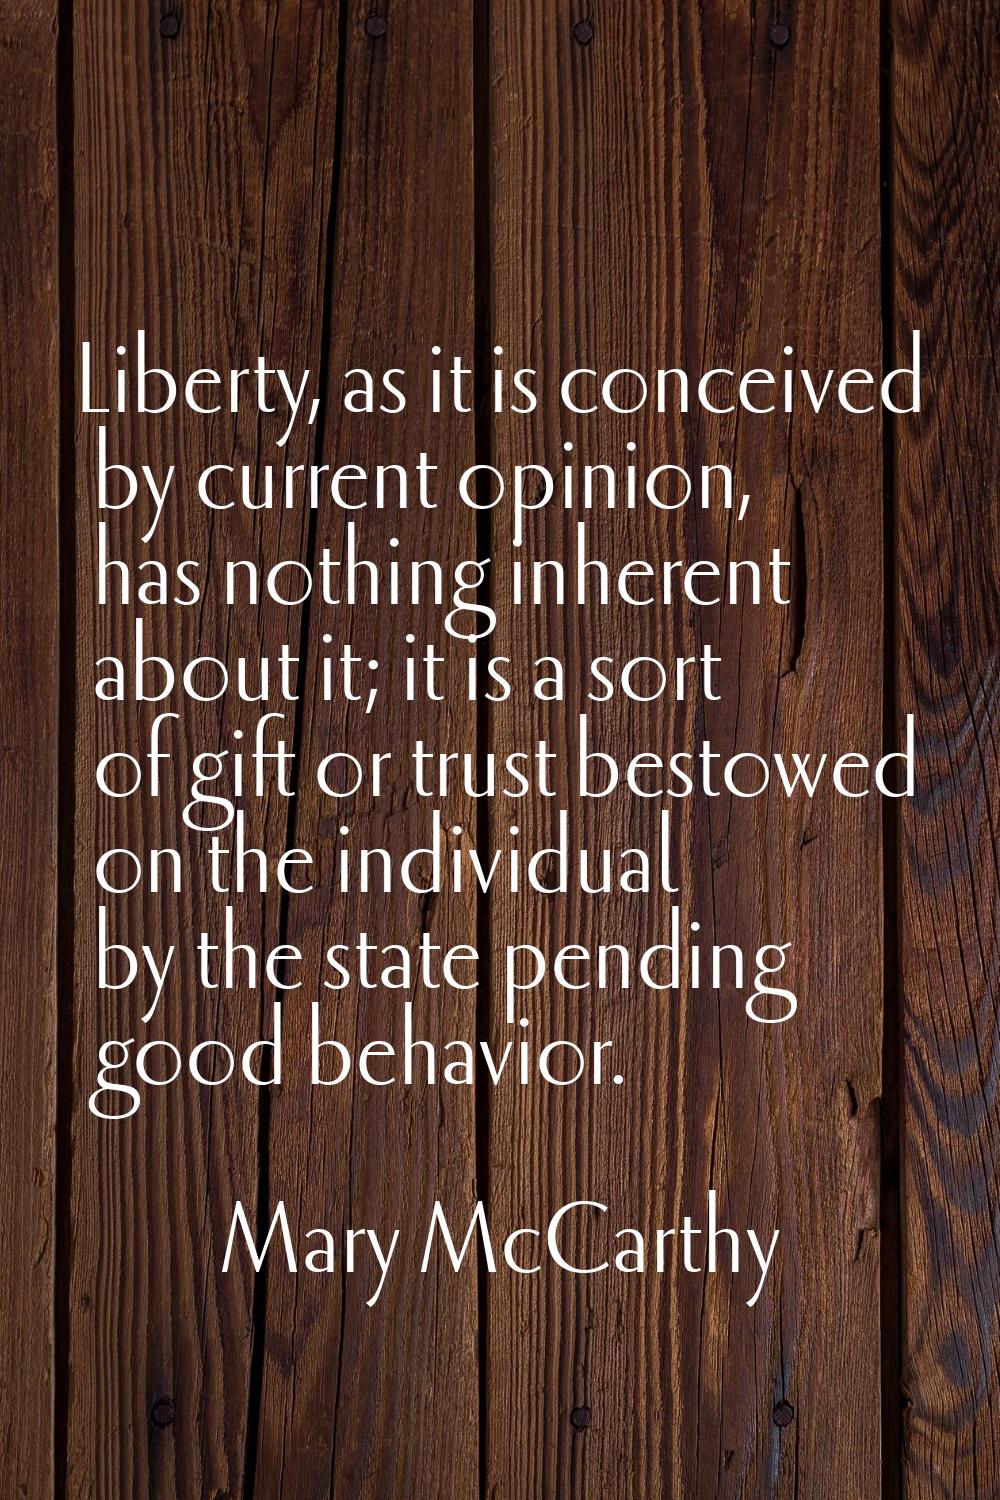 Liberty, as it is conceived by current opinion, has nothing inherent about it; it is a sort of gift